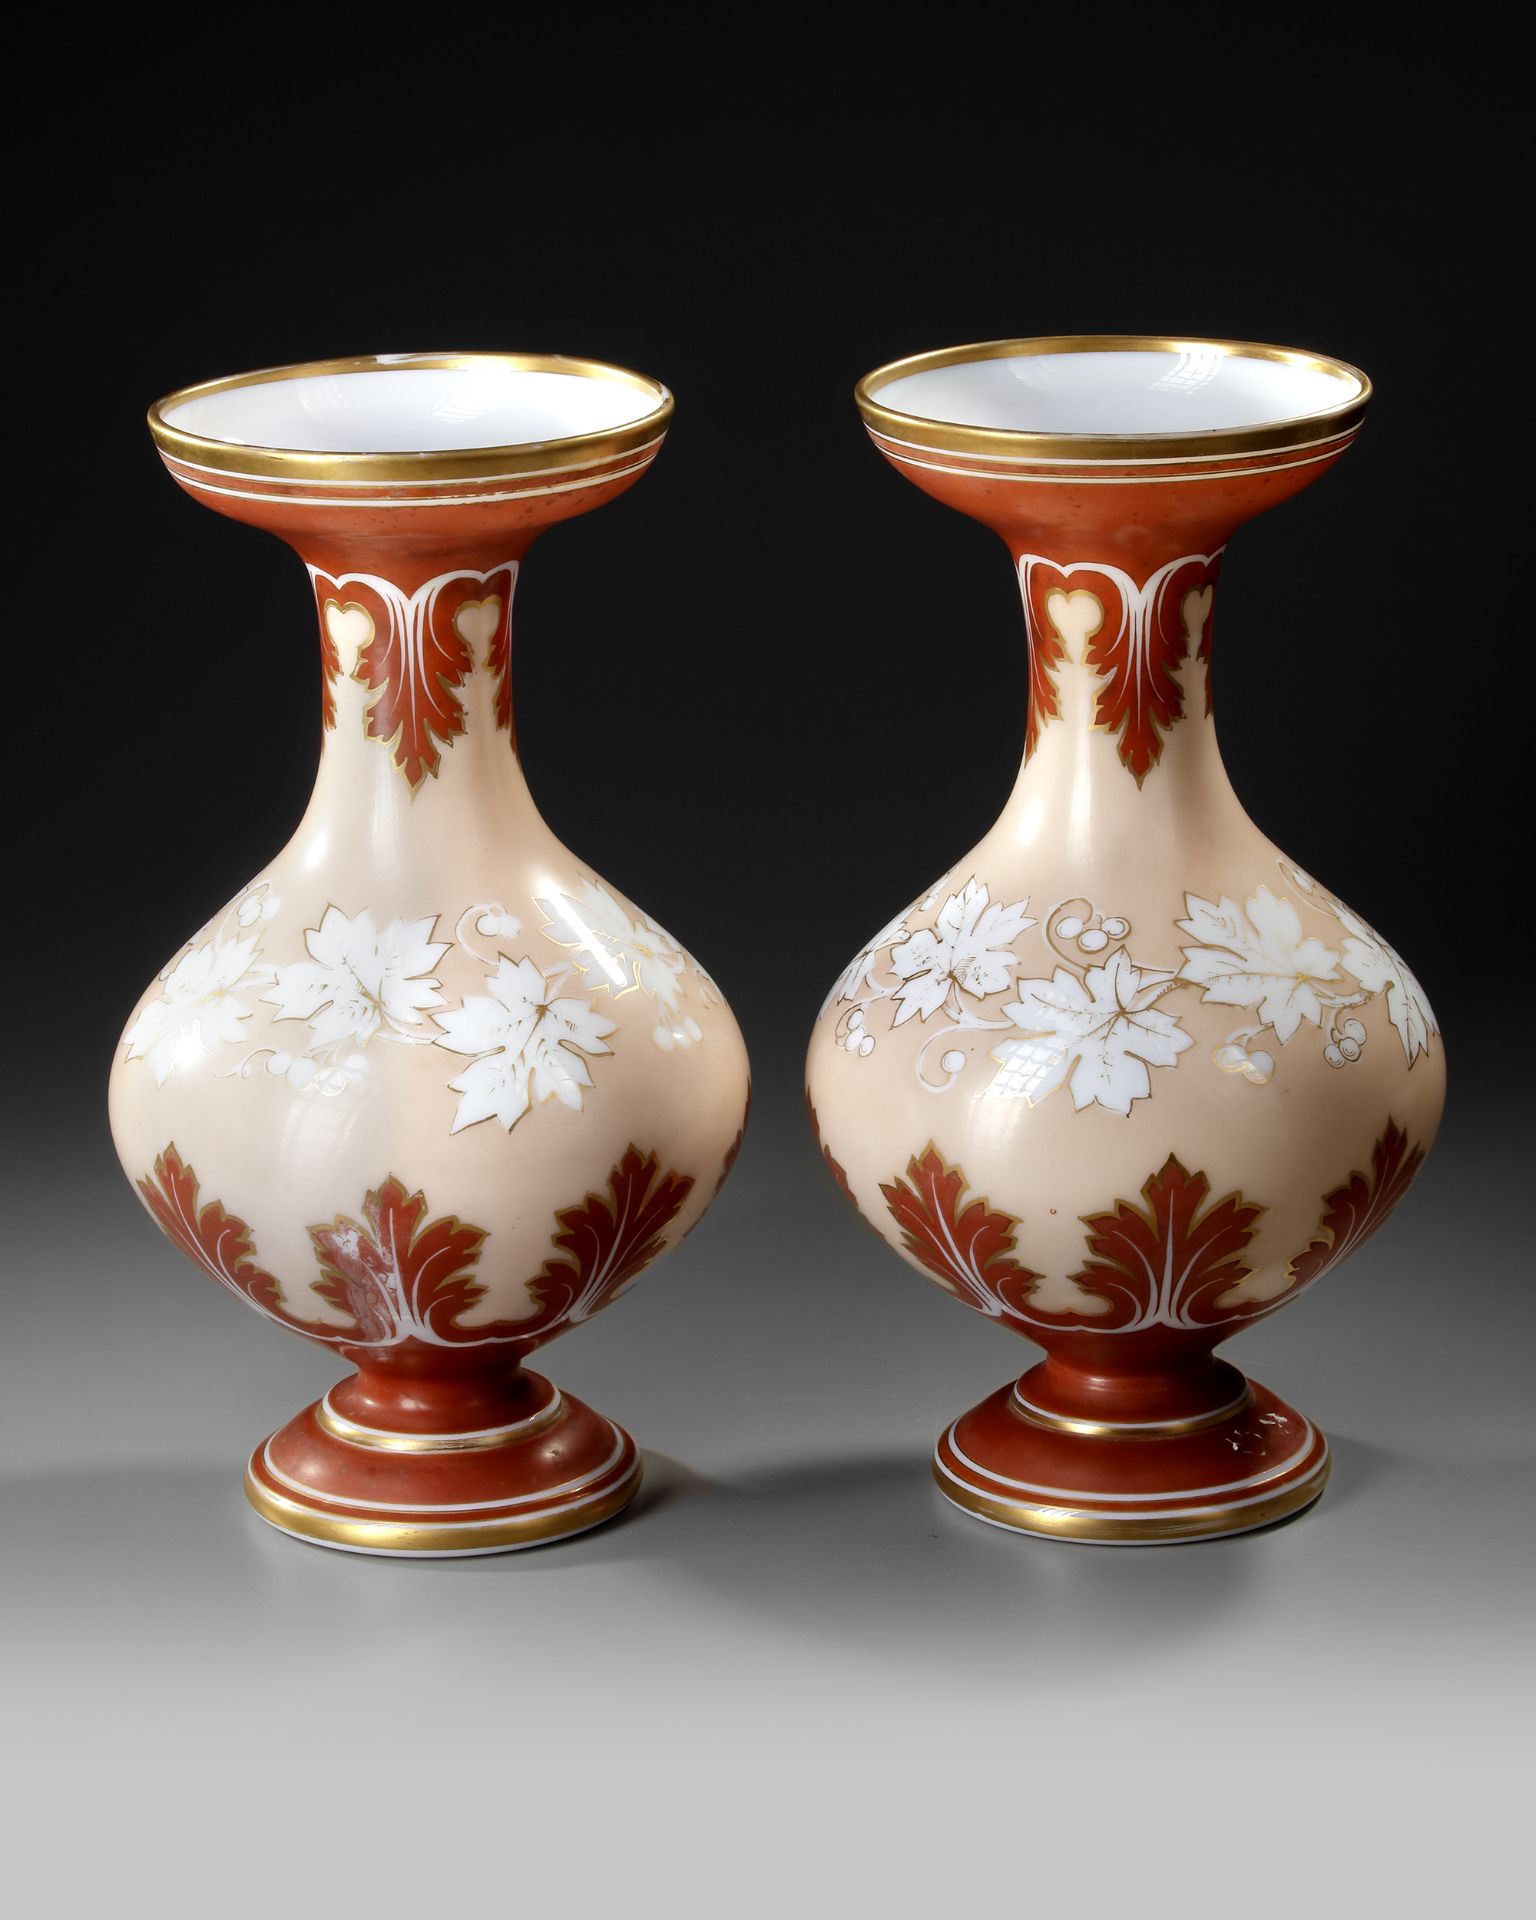 A PAIR OF OPALINE BACCARAT VASES, FRANCE, 19TH CENTURY - Image 4 of 6